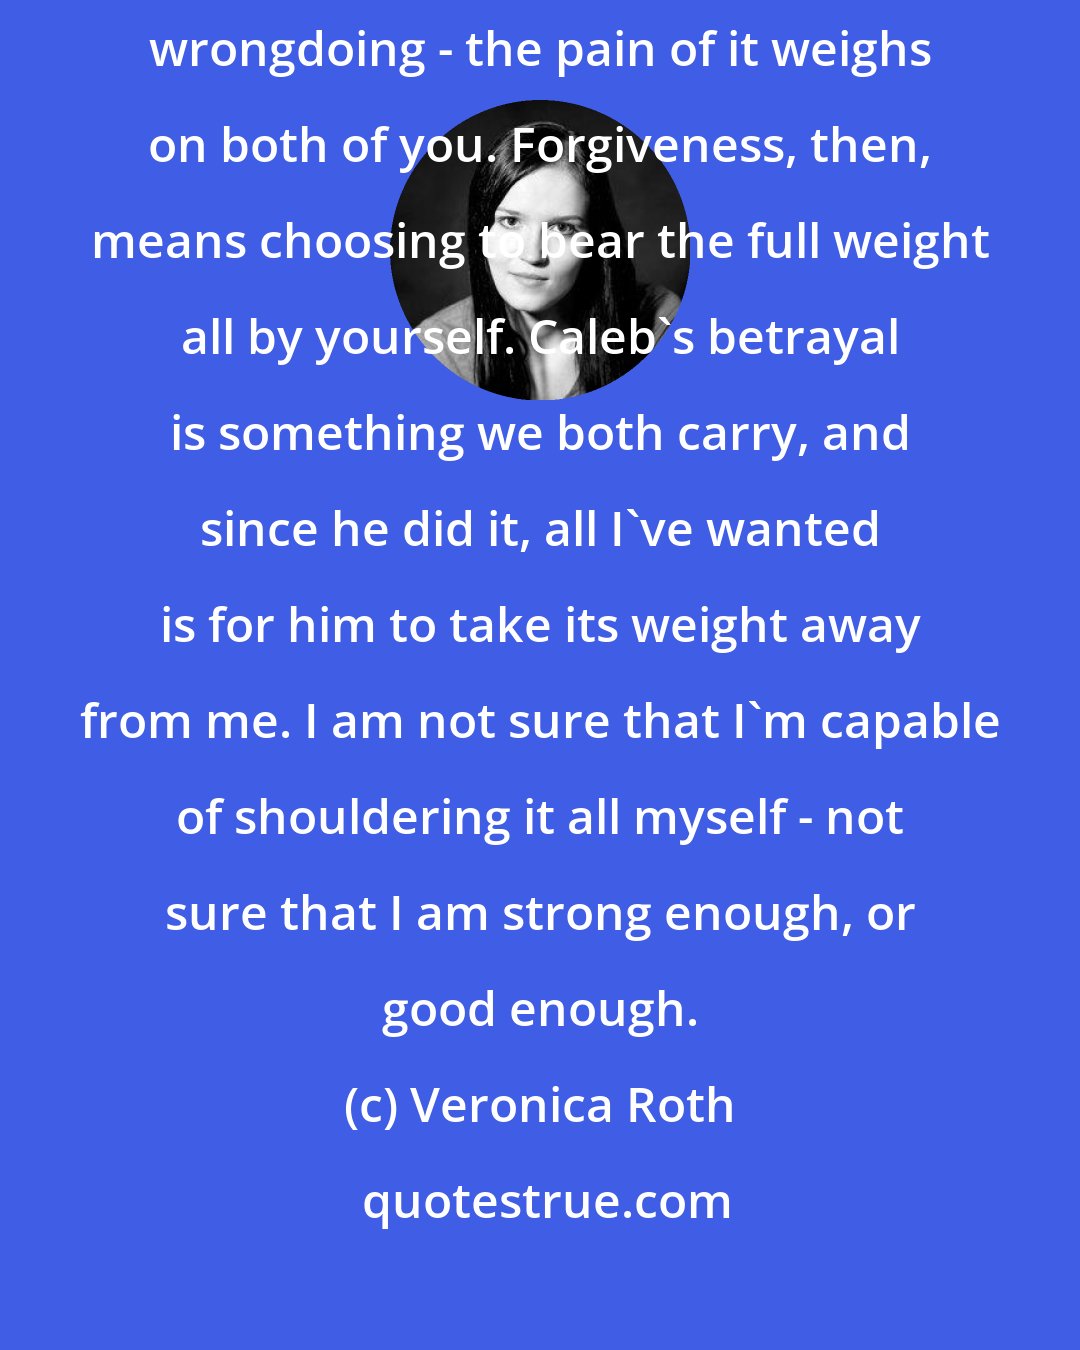 Veronica Roth: To me, when someone wrongs you, you both share the burden of that wrongdoing - the pain of it weighs on both of you. Forgiveness, then, means choosing to bear the full weight all by yourself. Caleb's betrayal is something we both carry, and since he did it, all I've wanted is for him to take its weight away from me. I am not sure that I'm capable of shouldering it all myself - not sure that I am strong enough, or good enough.